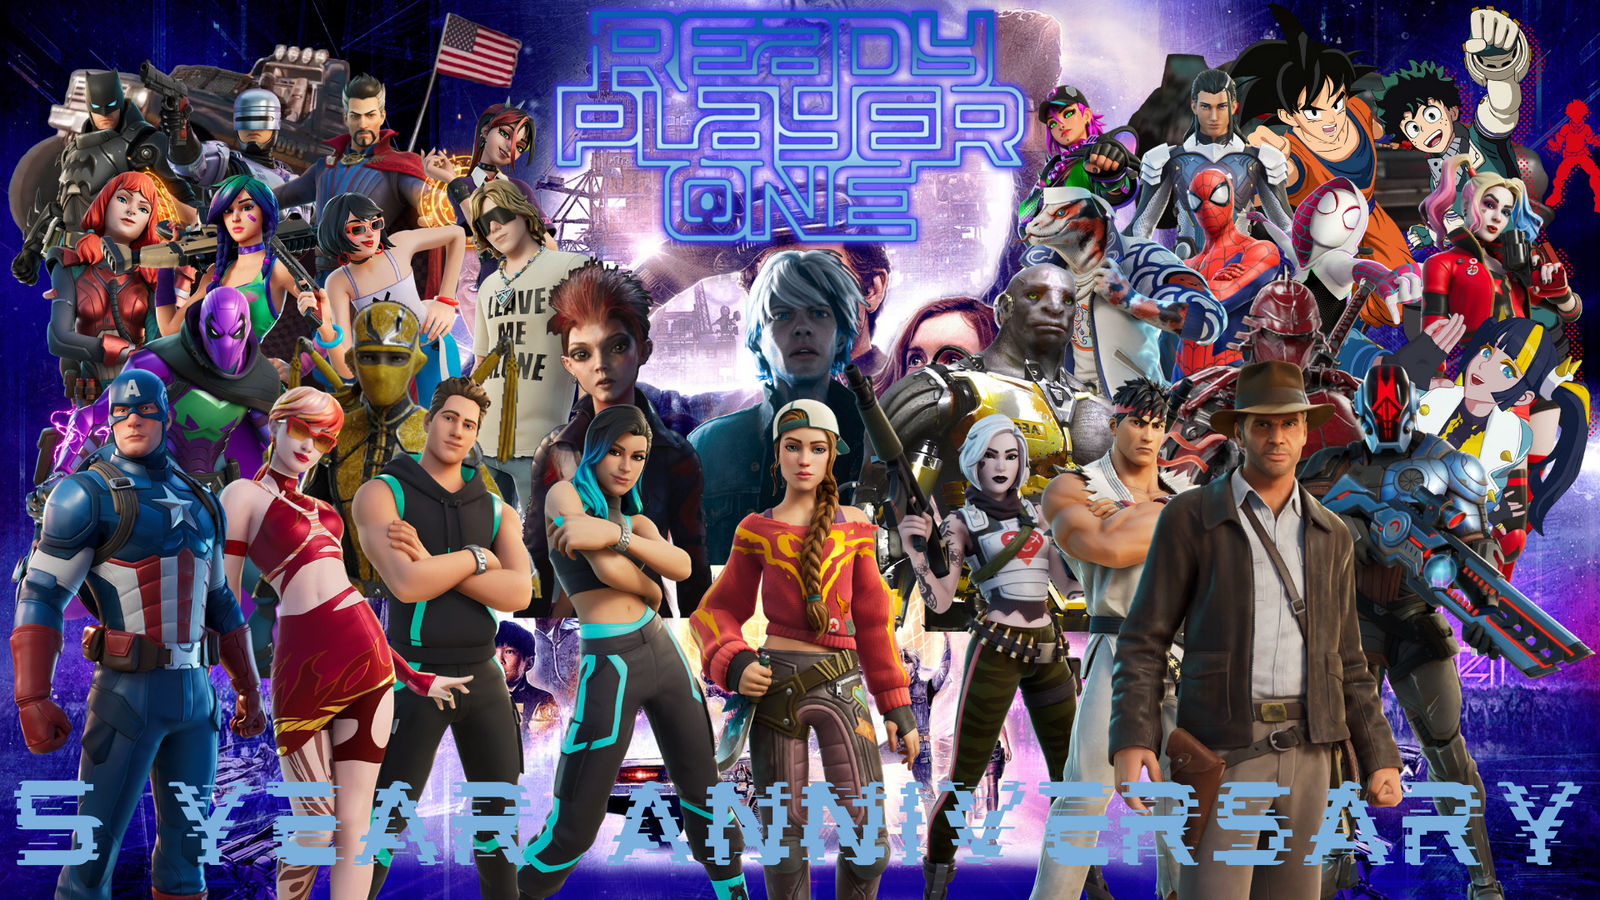 Ready Player One 5 Year Anniversary #2 by DipperBronyPines98 on DeviantArt